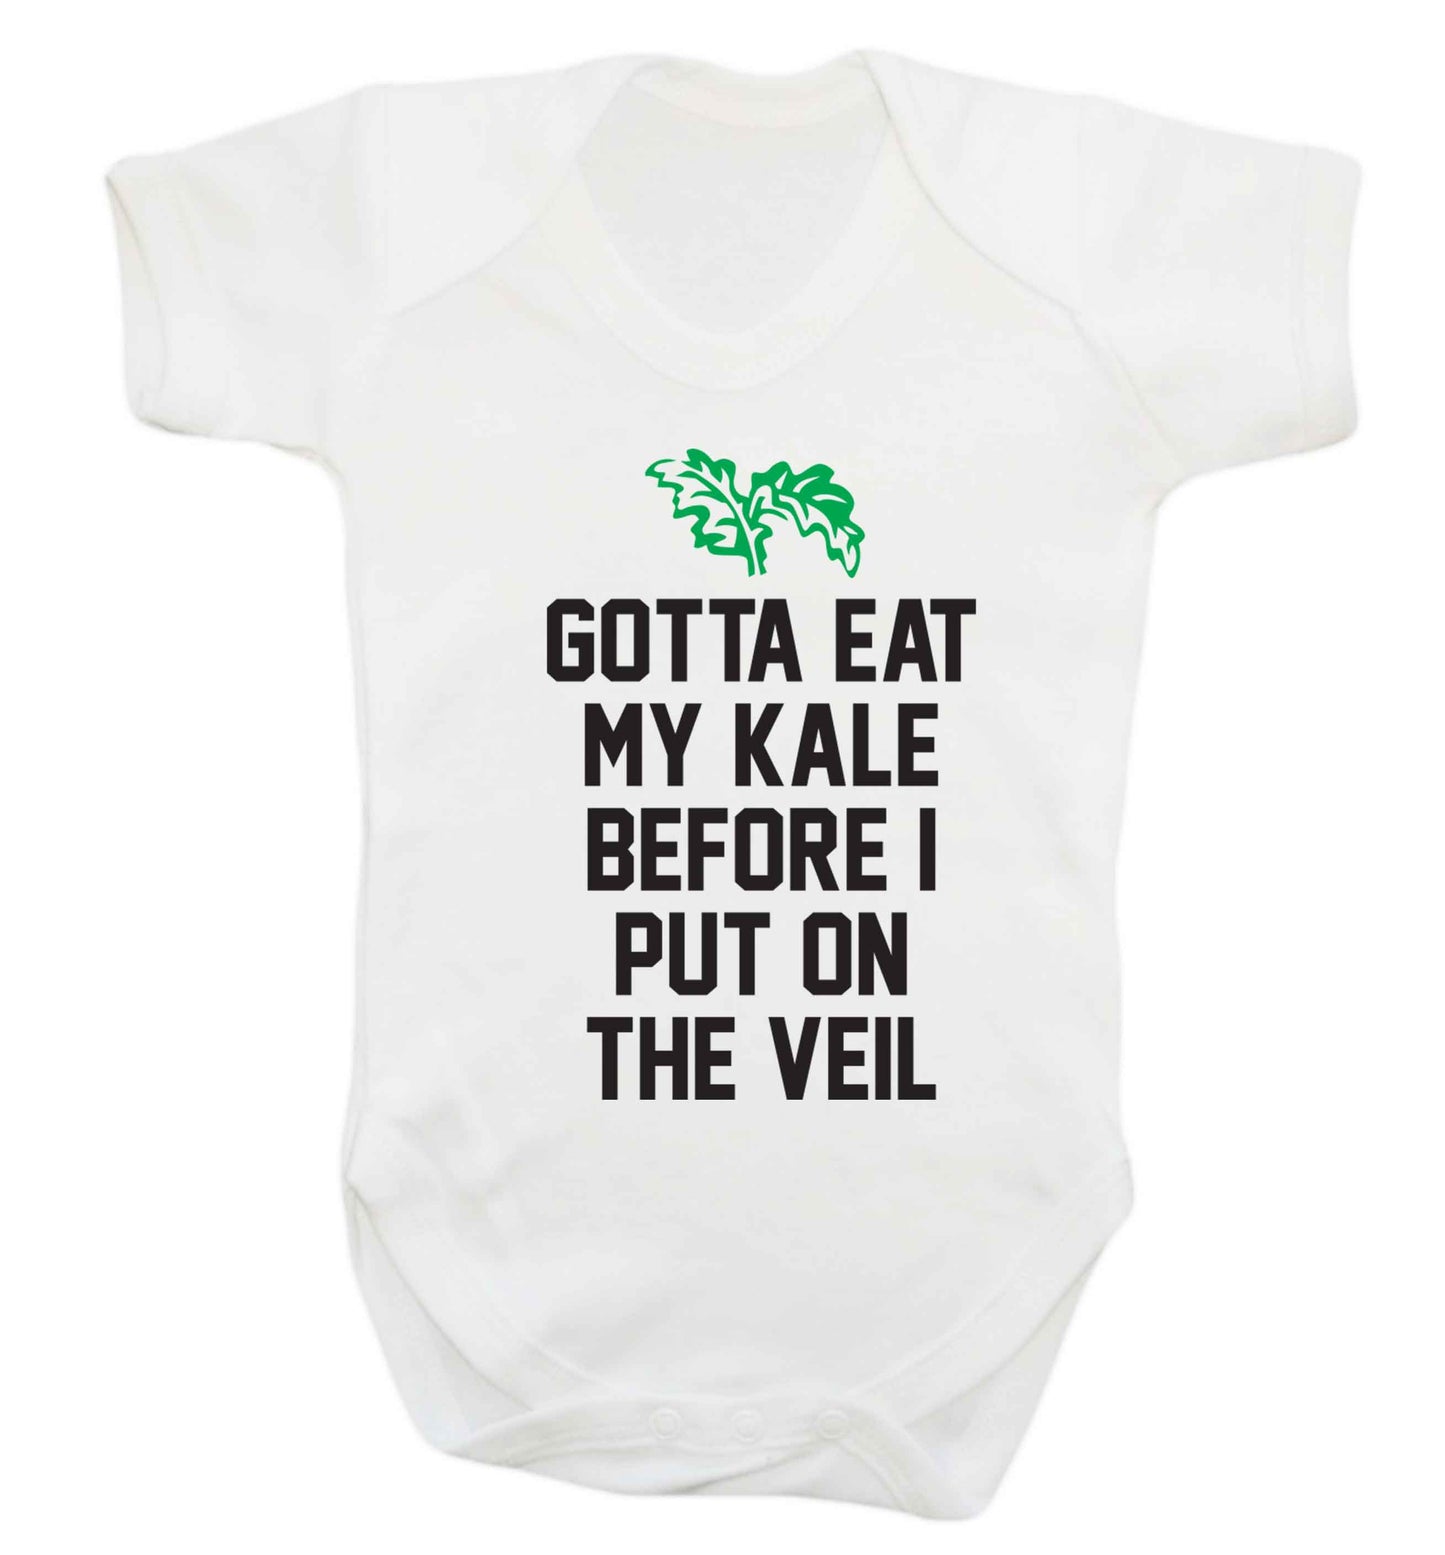 Gotta eat my kale before I put on the veil Baby Vest white 18-24 months